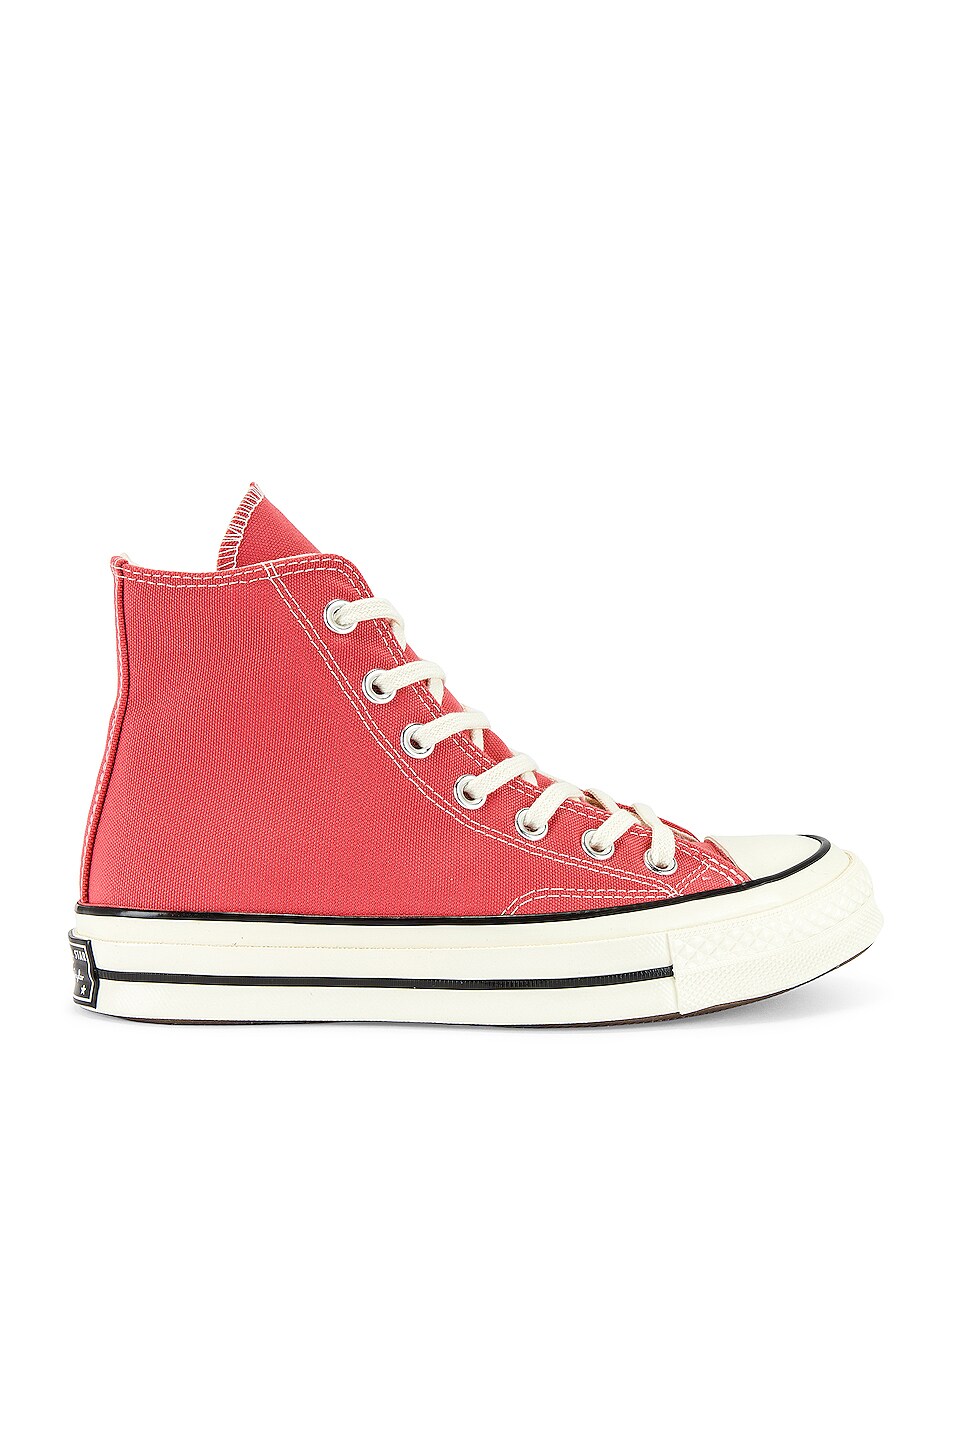 Image 1 of Converse Chuck 70 Seasonal Color Recycled Canvas Hi in Terracotta Pink & Egret